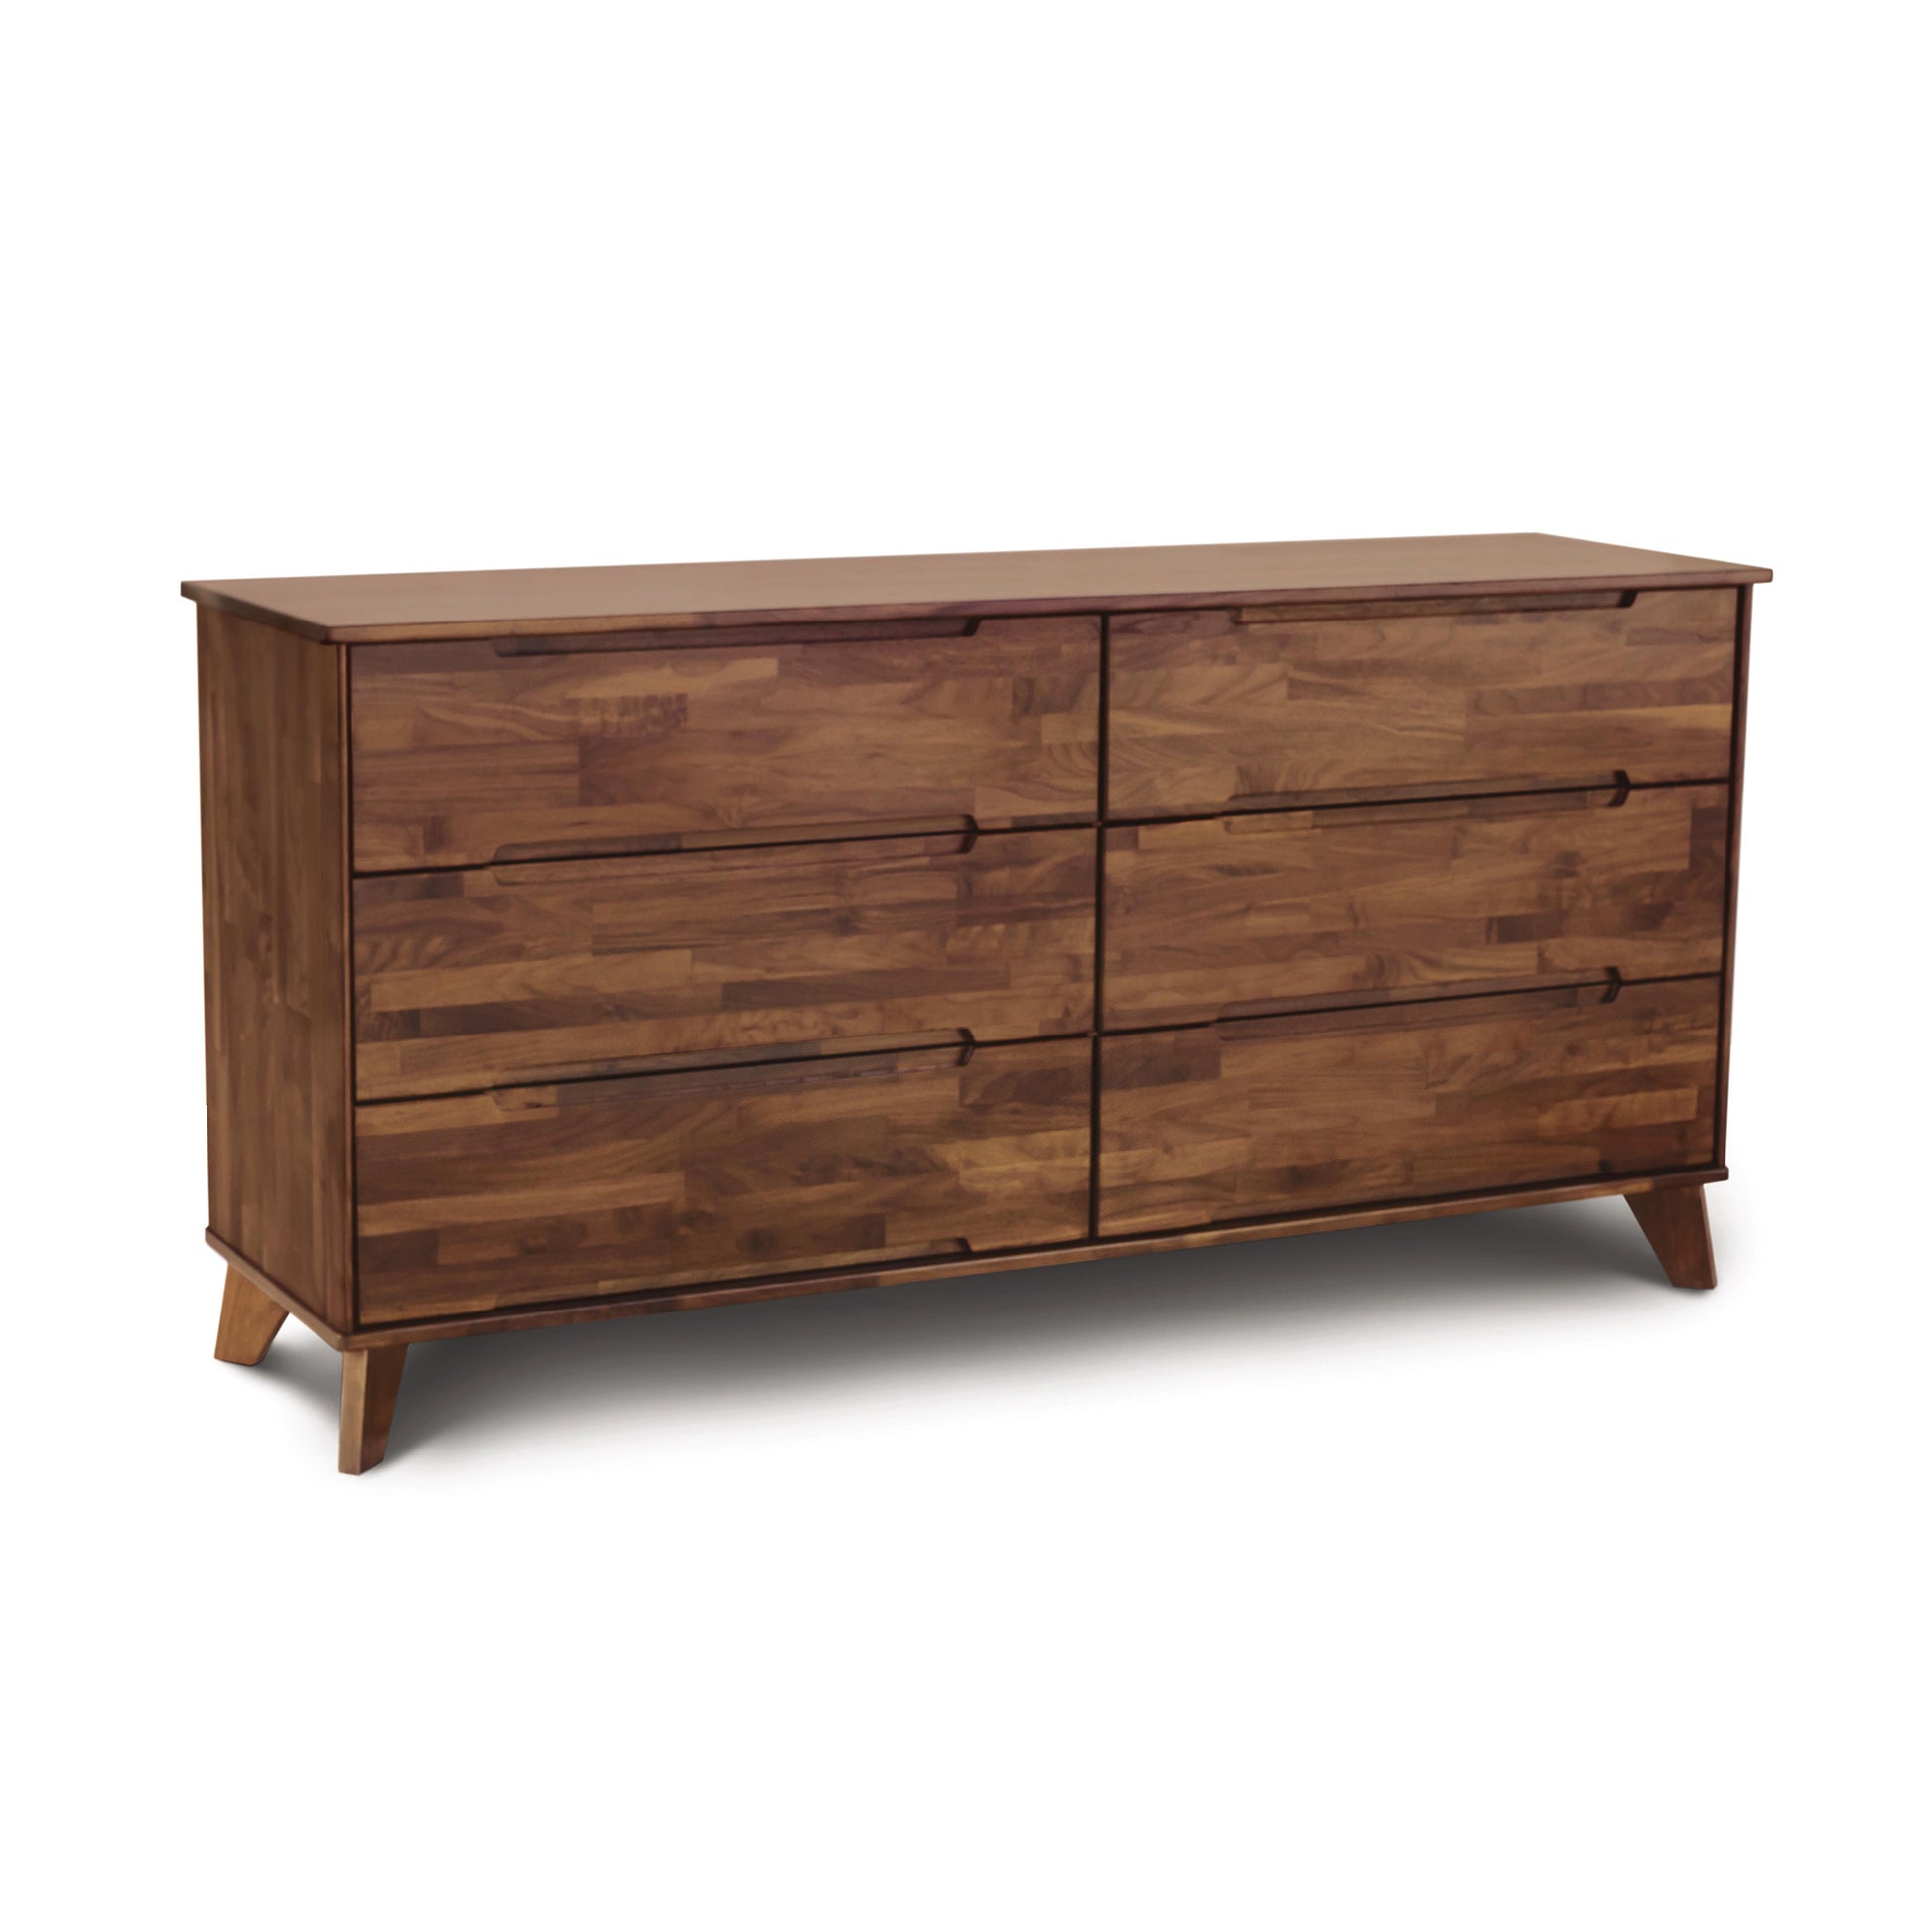 Copeland Furniture Linn 6-Drawer Dresser with tapered legs on a white background.